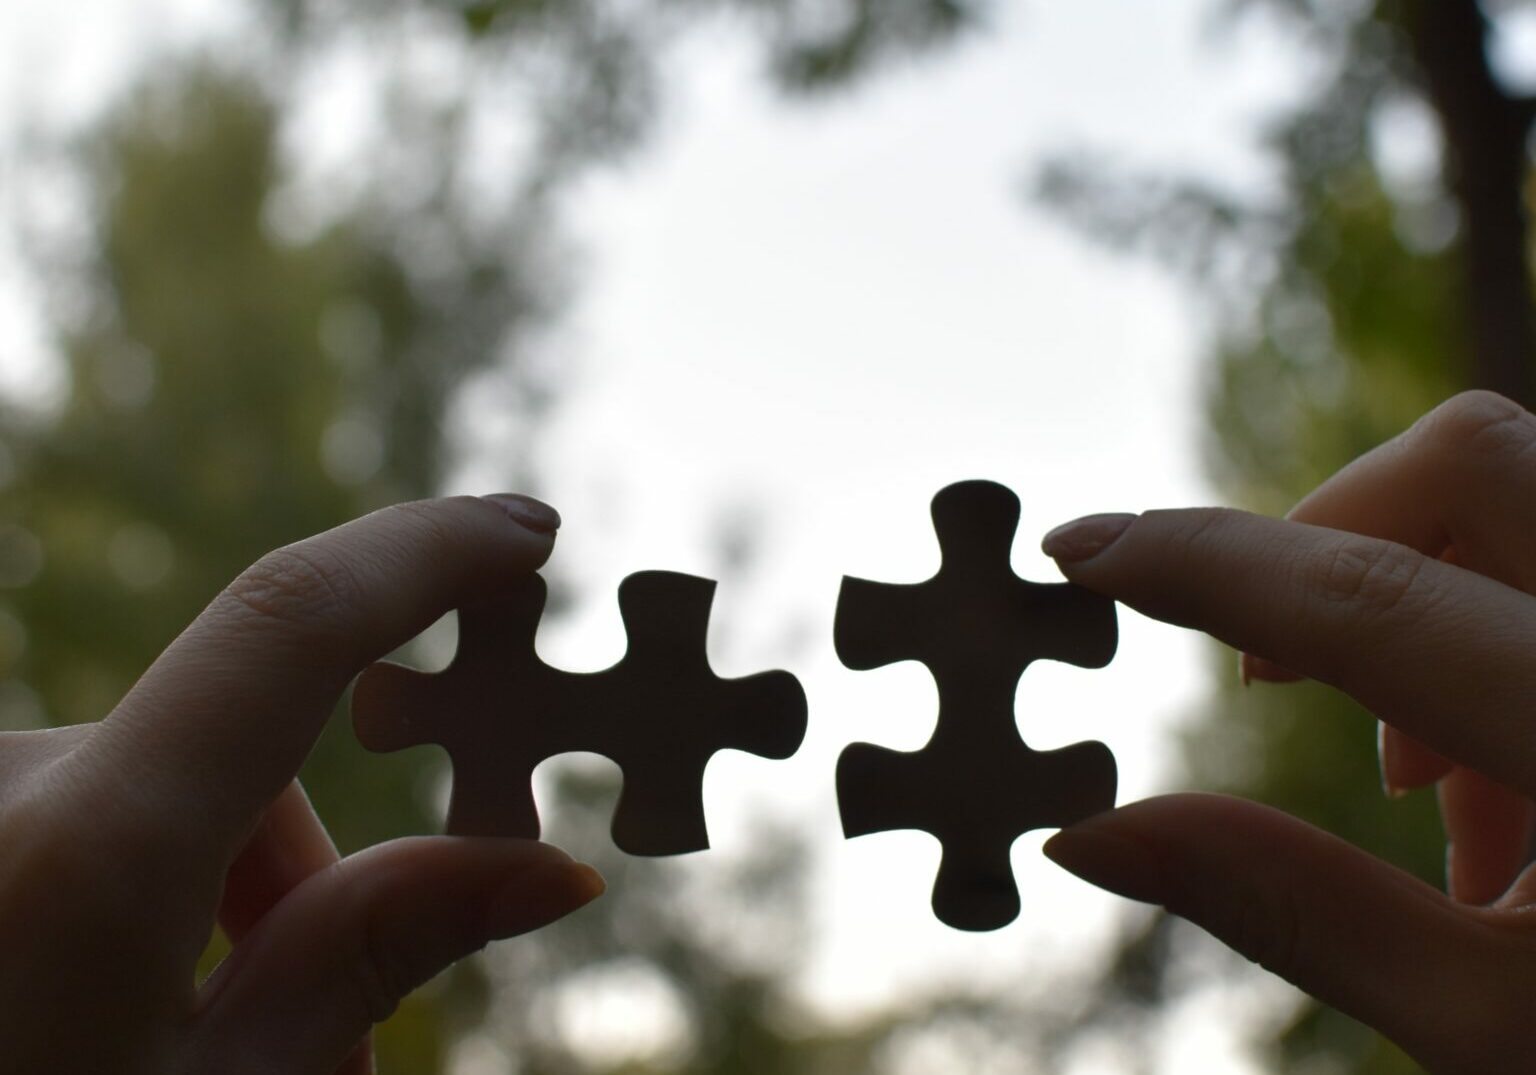 A monochrome image of two hands showing matching jigsaw puzzle pieces